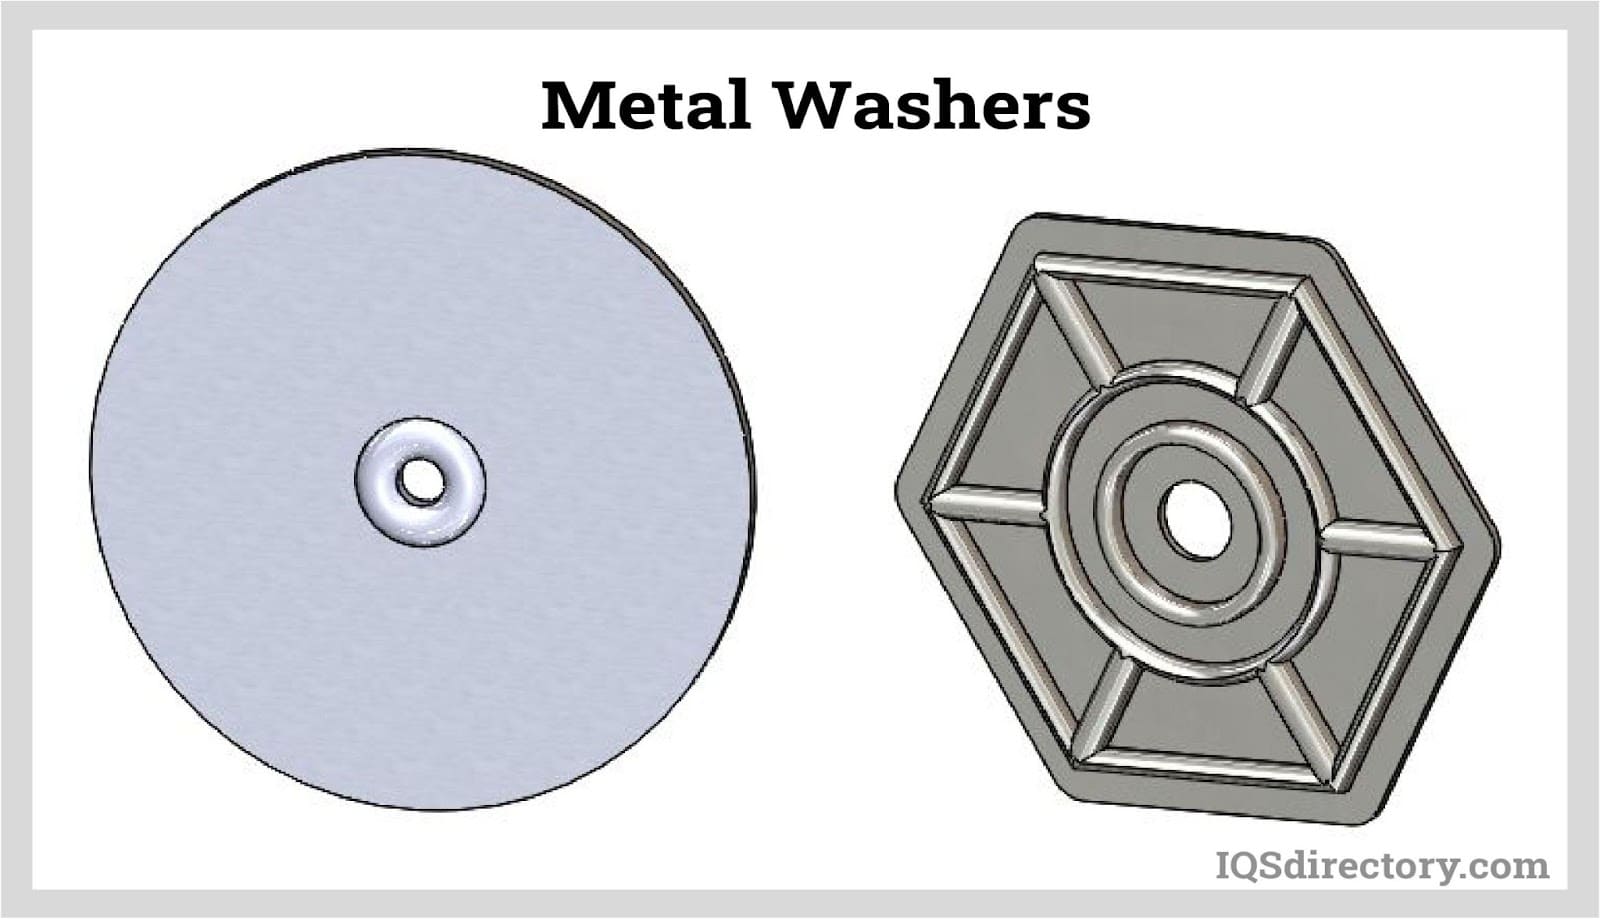 The Many Materials of Washers - Steel, Brass, Stainless, & More